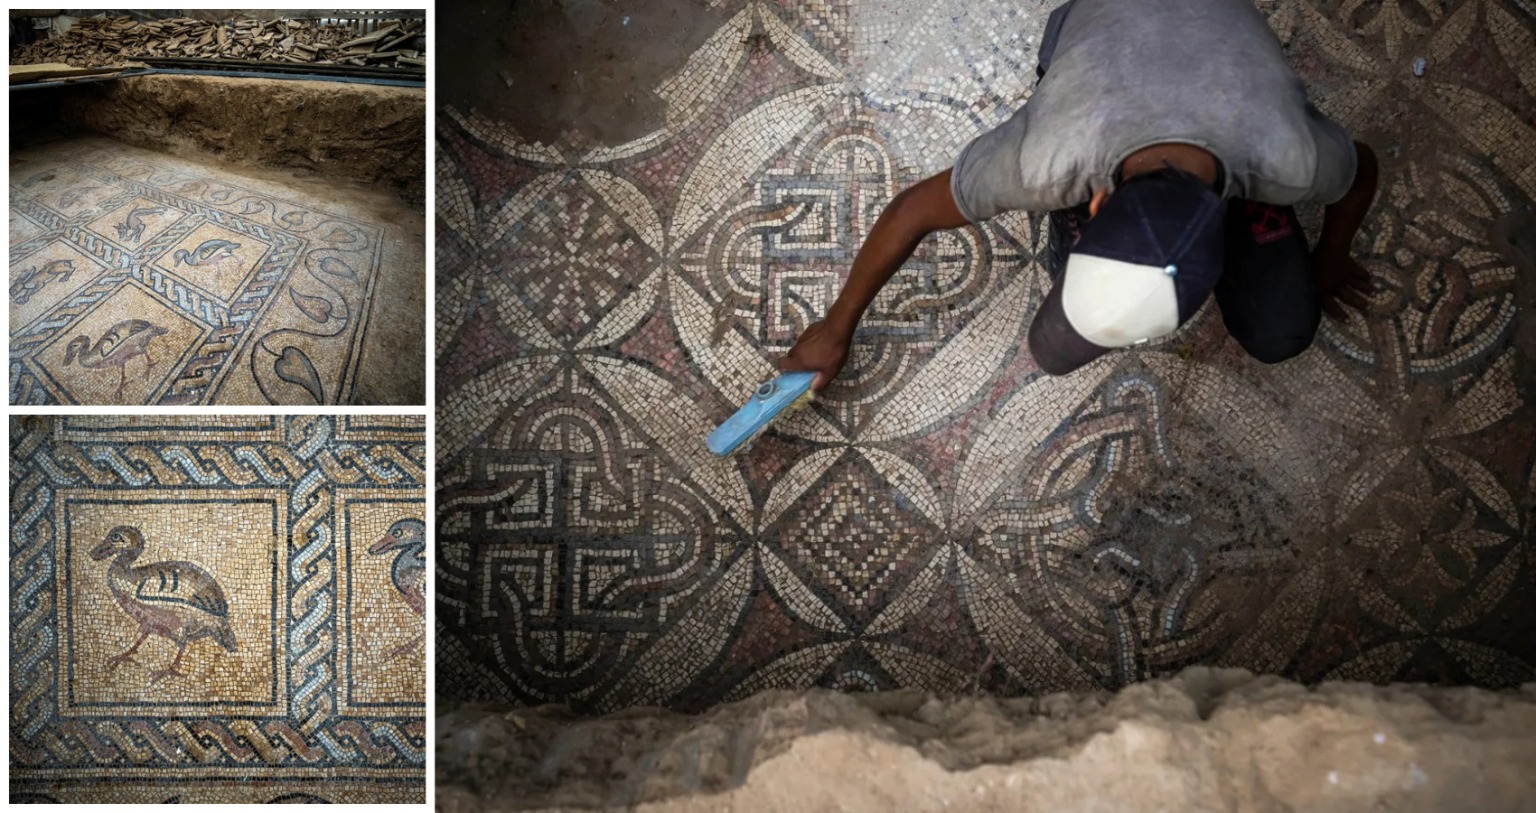 A Palestinian farmer was planting a tree. His shovel hit an ‘exceptional’ ancient mosaic.